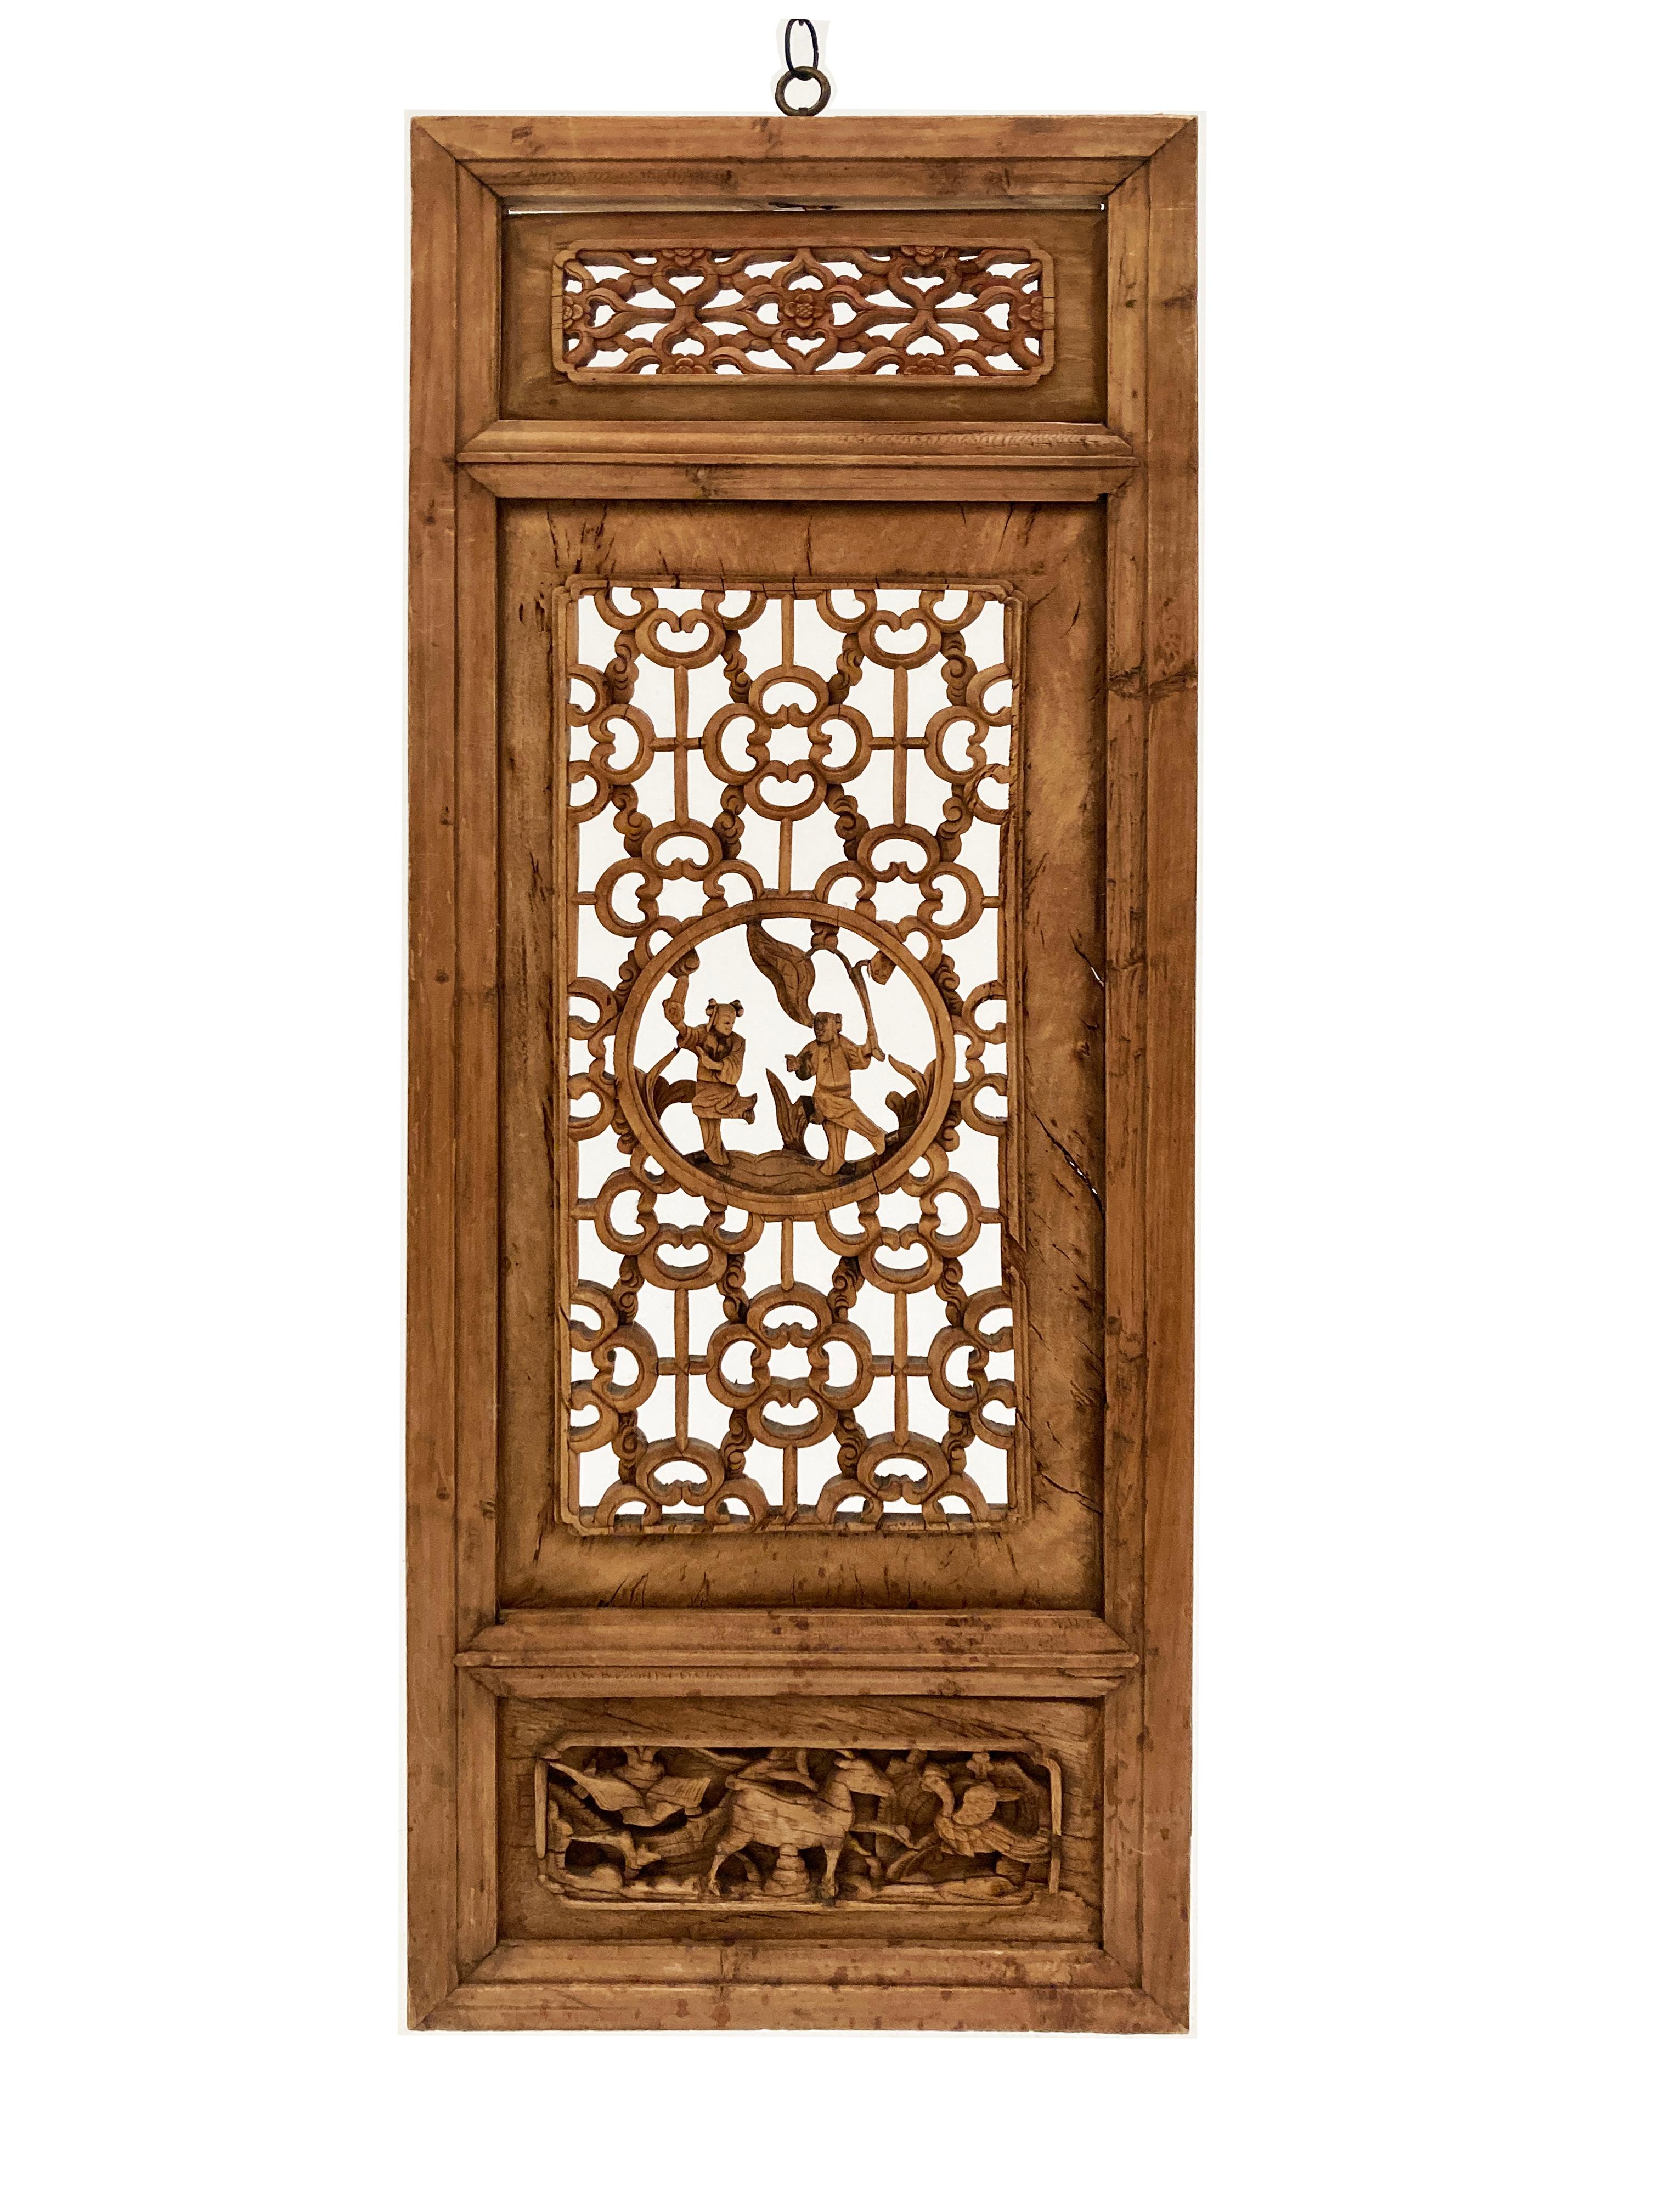 When it comes to wanting that perfect and unique conversation piece in your beautiful room, look no further than these antique hand carved wood Chinese panels. These are stunning. Words cannot come close to describing how beautiful and artfully